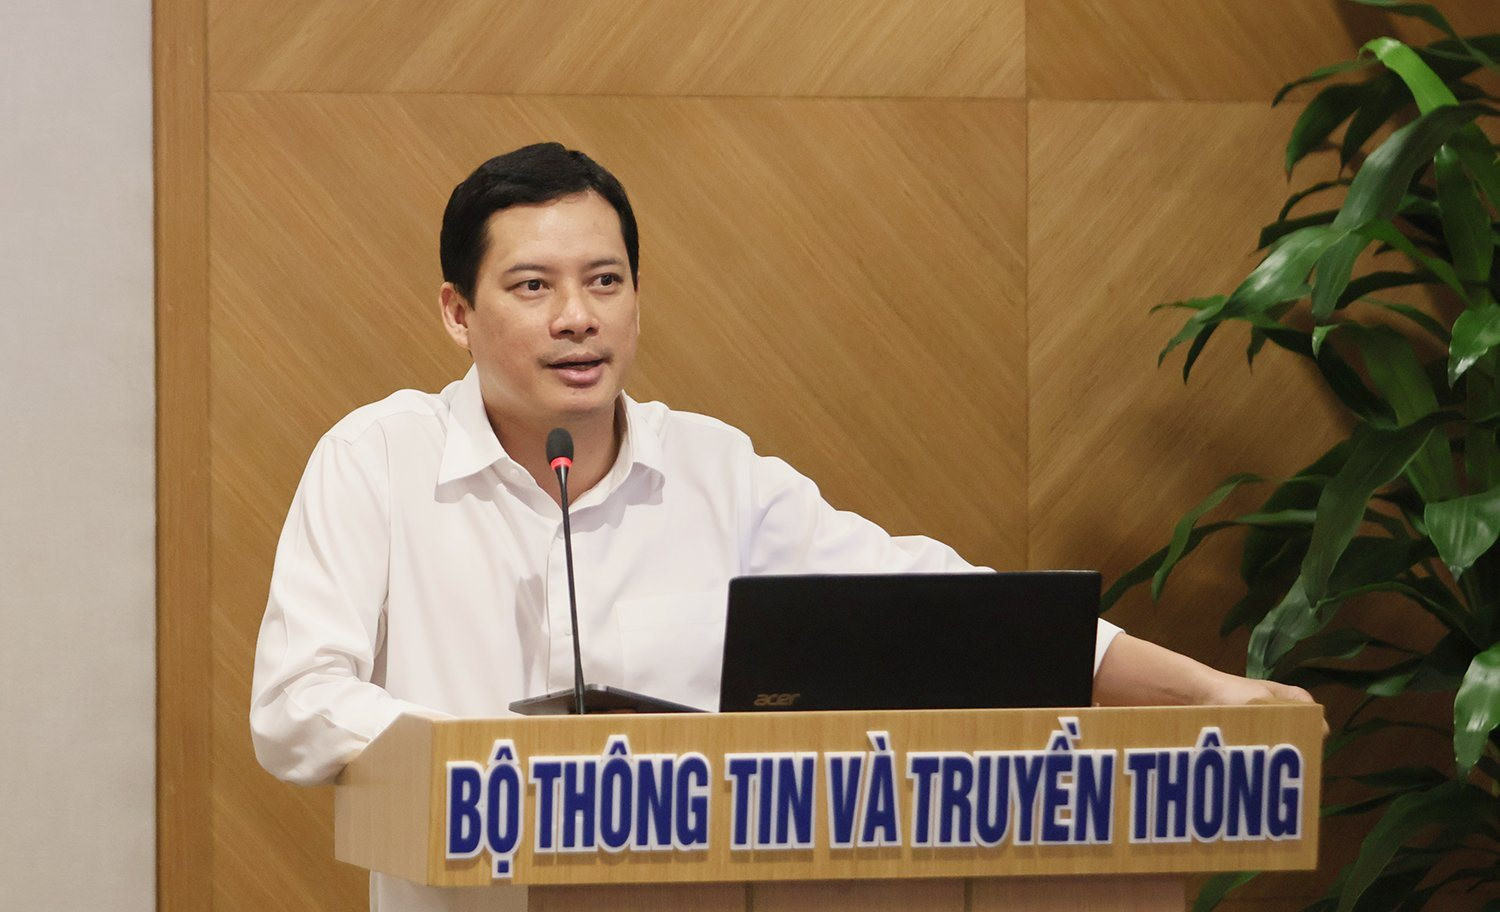 Mr Le Quang Tu Do, Director of the Department of Radio, Television and Electronic Information - Ministry of Information and Communications